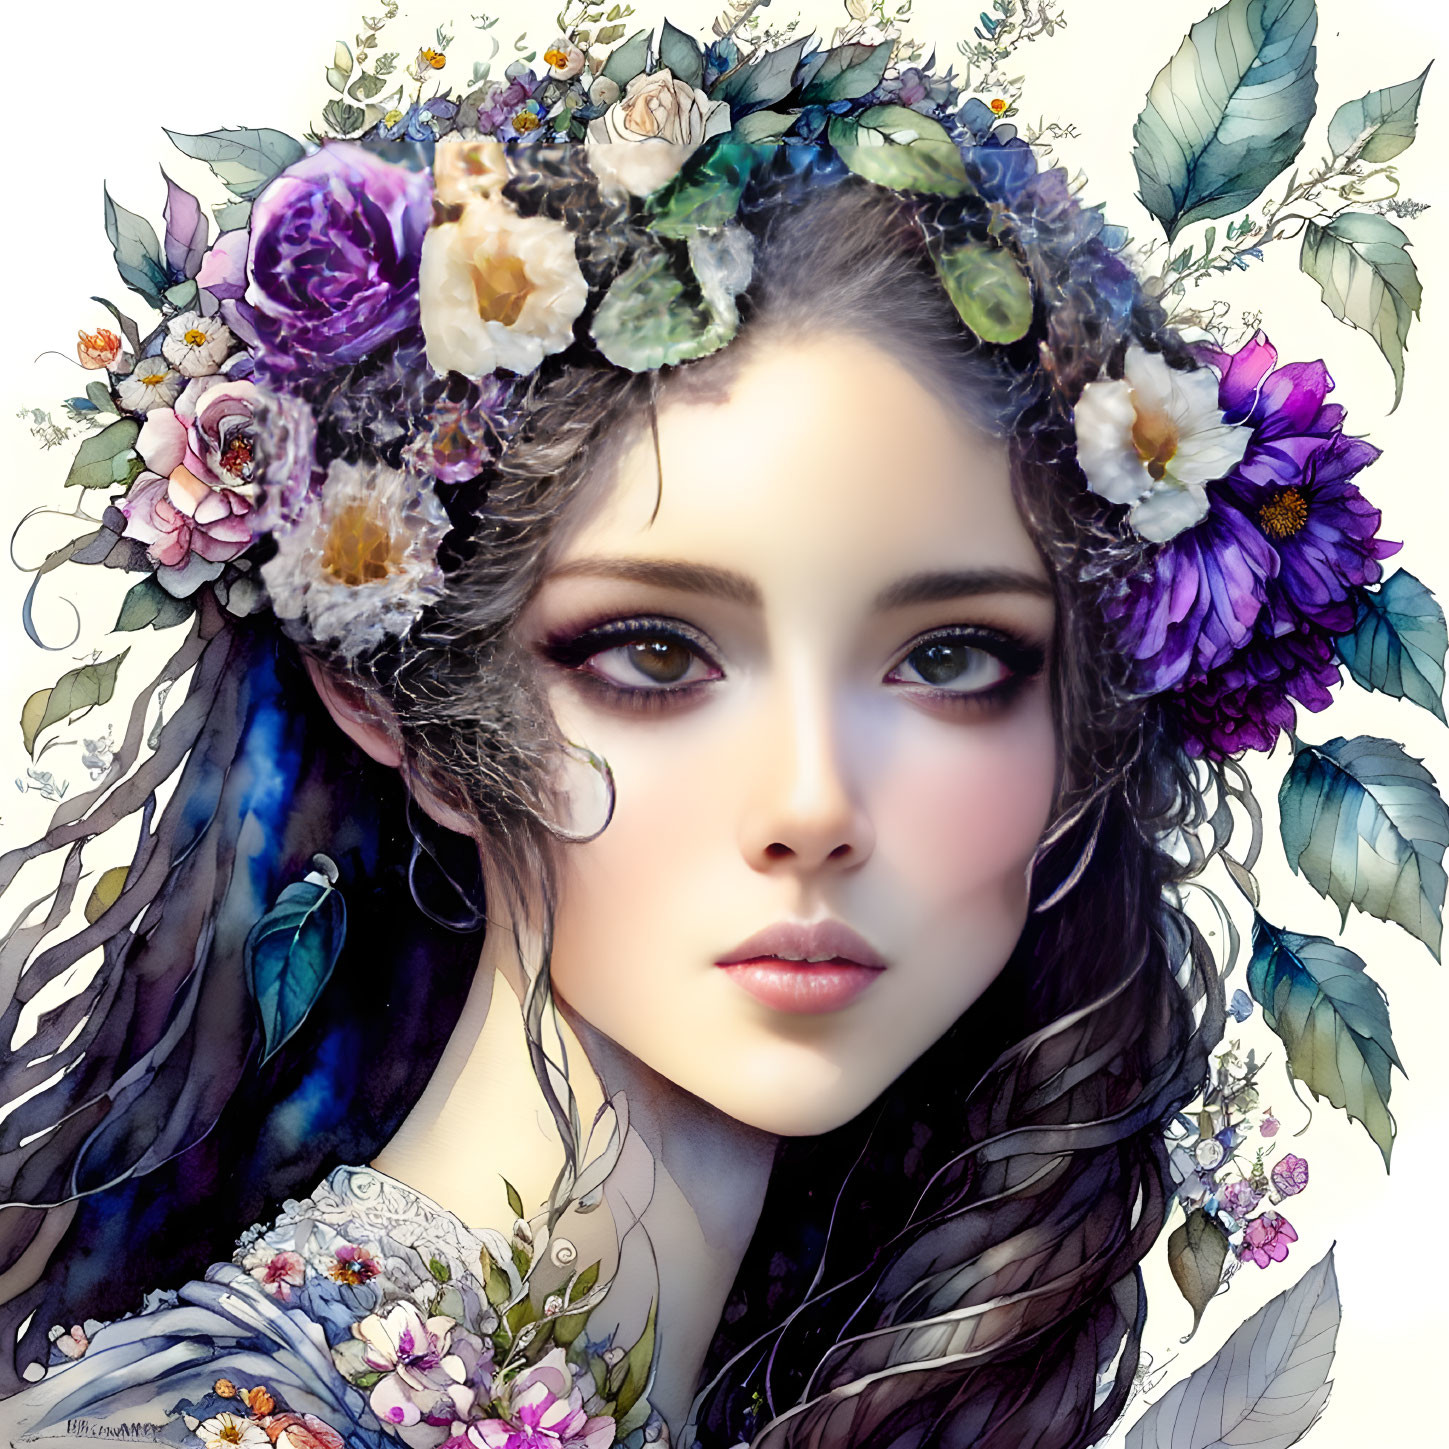 Illustrated female with expressive eyes and floral crown in detailed artwork